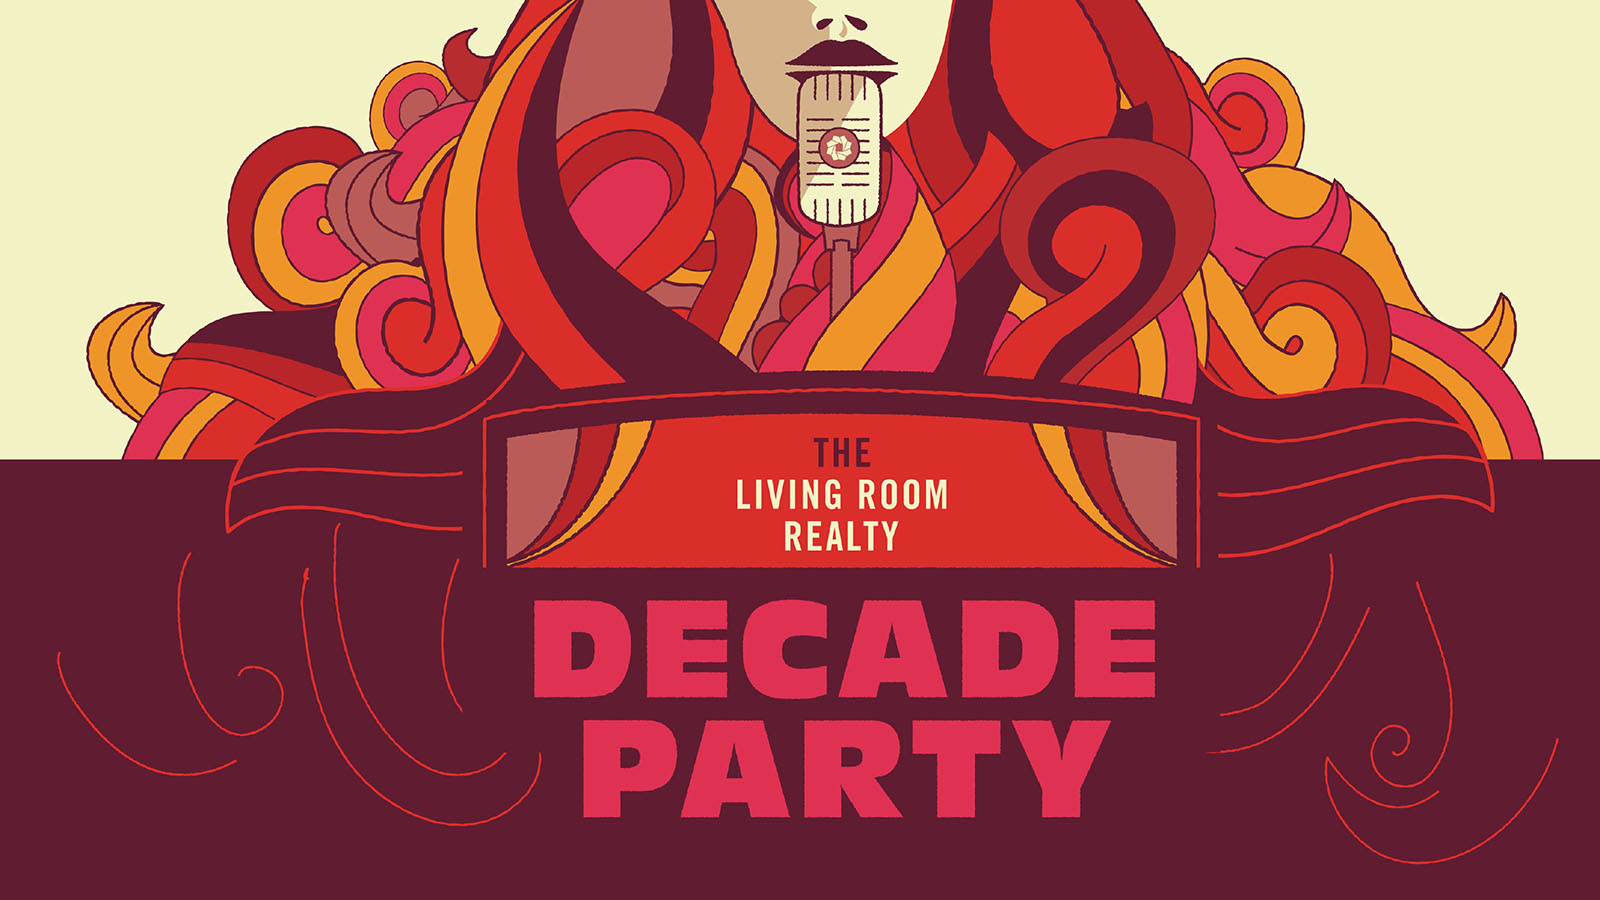 Celebrating a Decade of Living Room Realty